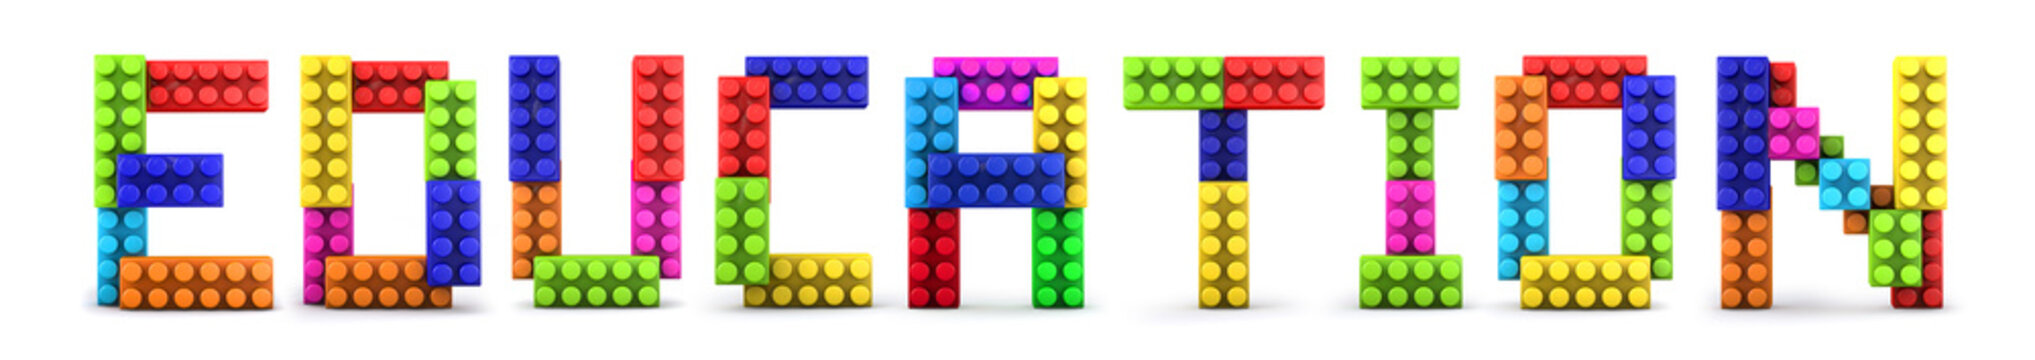 Word education made of colorful building block. 3d letter. 3d illustration.